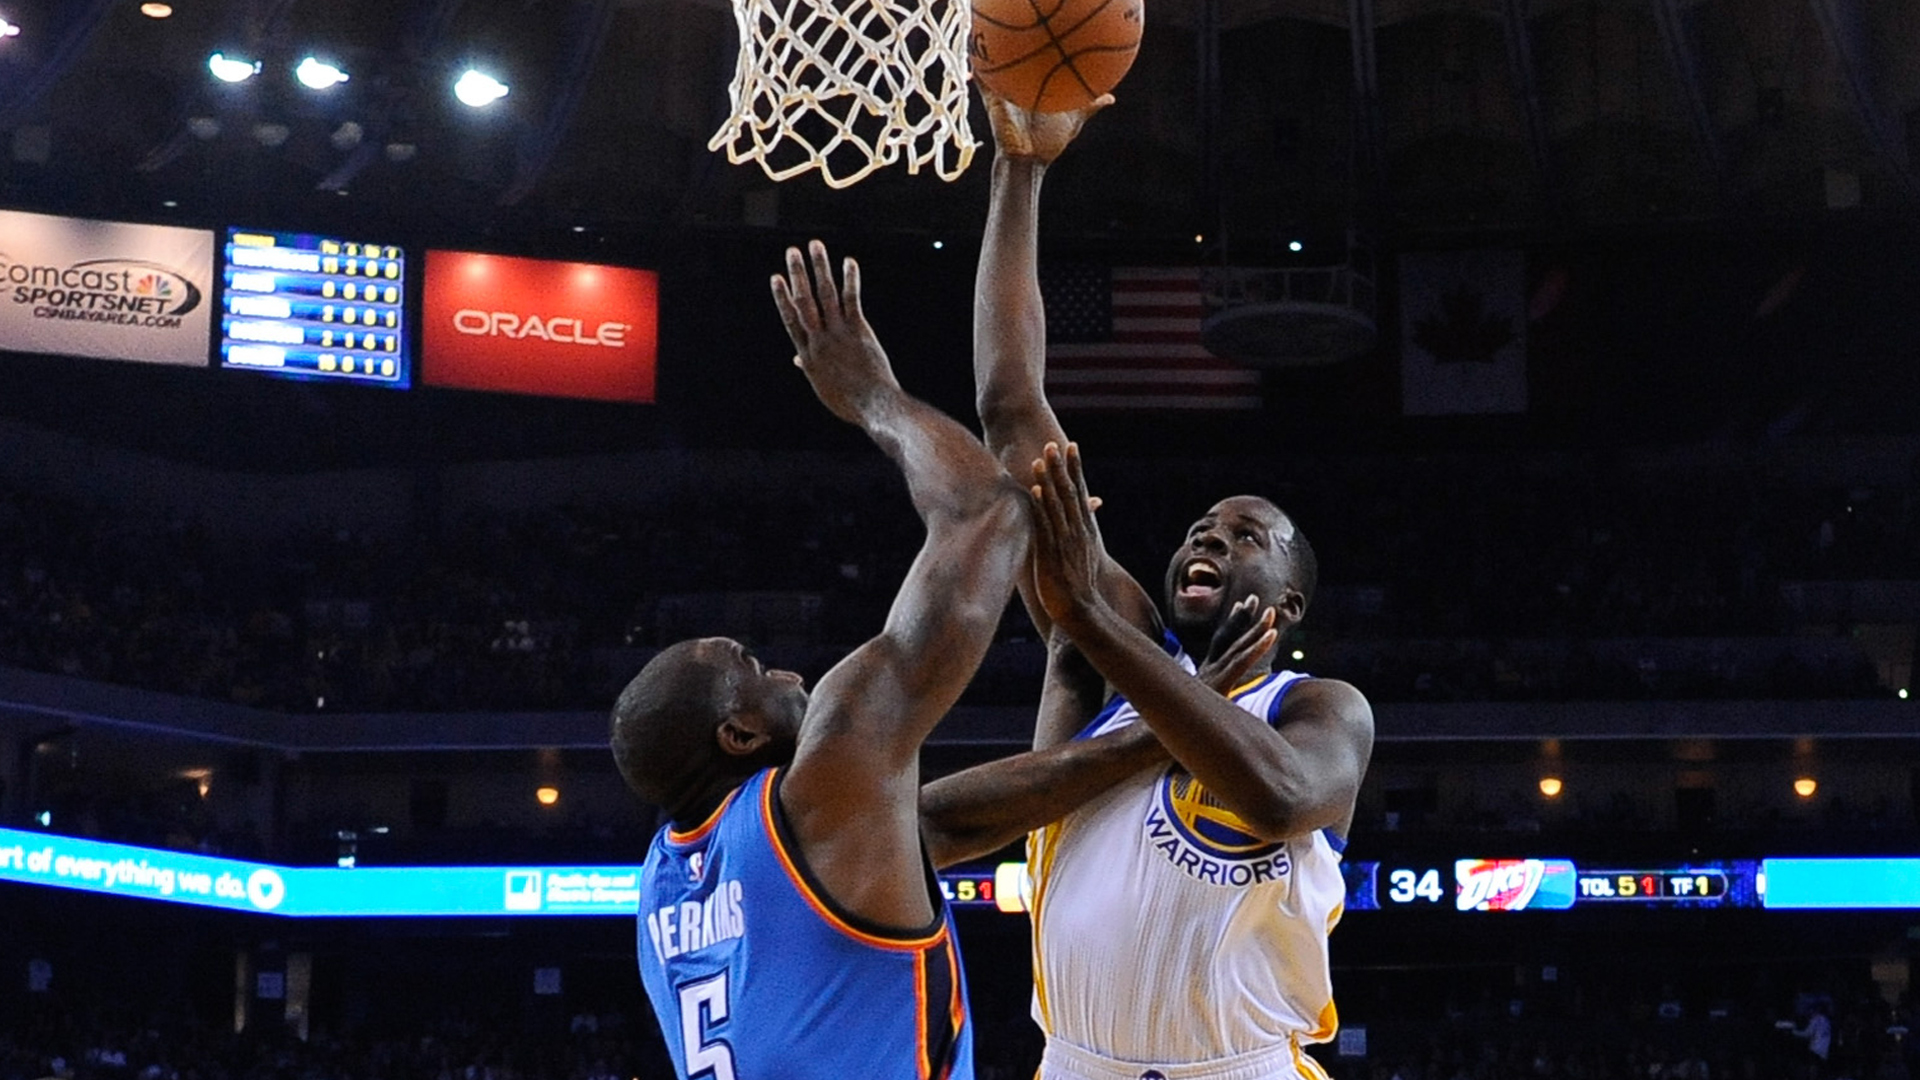 Draymond Green's letter to Ben Wallace: You inspired me